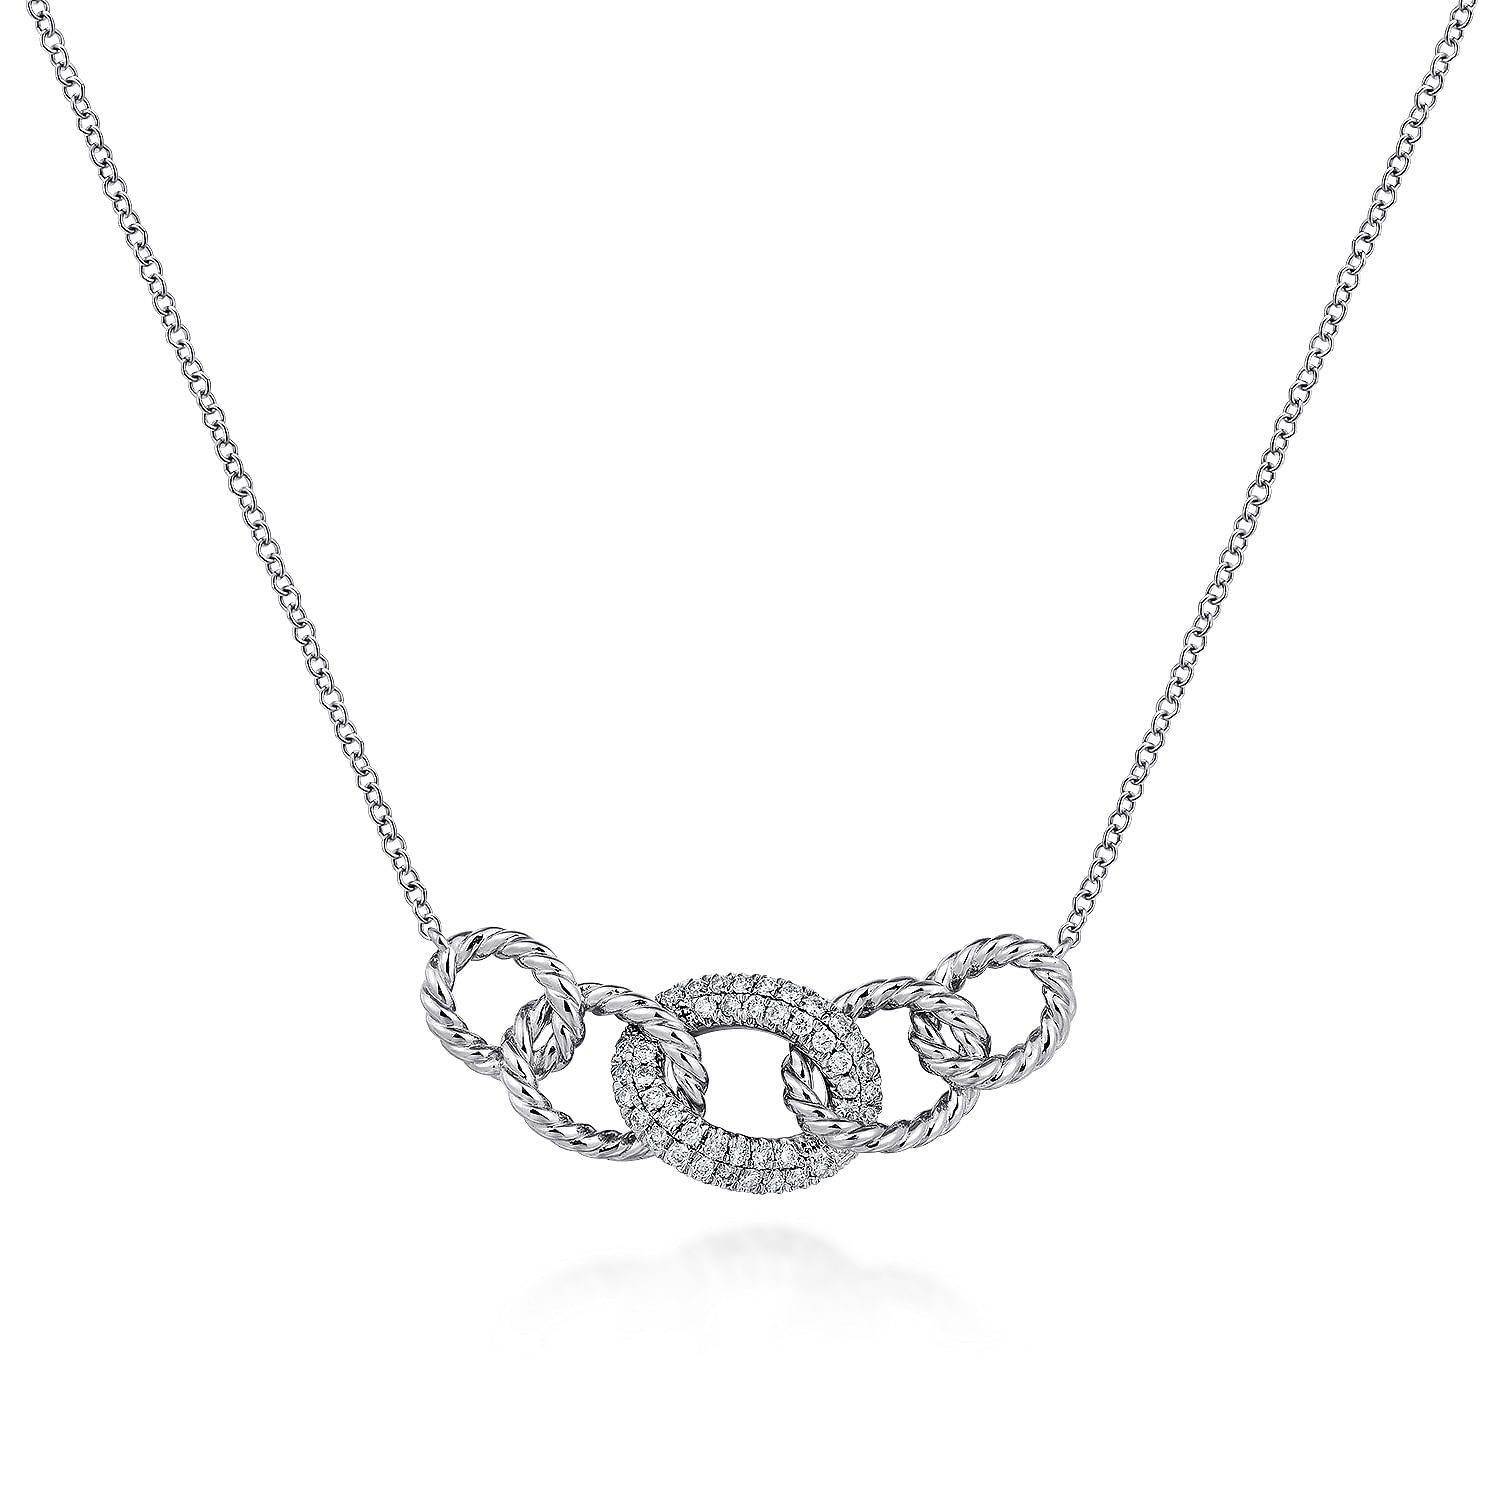 14K White Gold Twisted Rope Link Necklace with Pavé Diamond Link Station